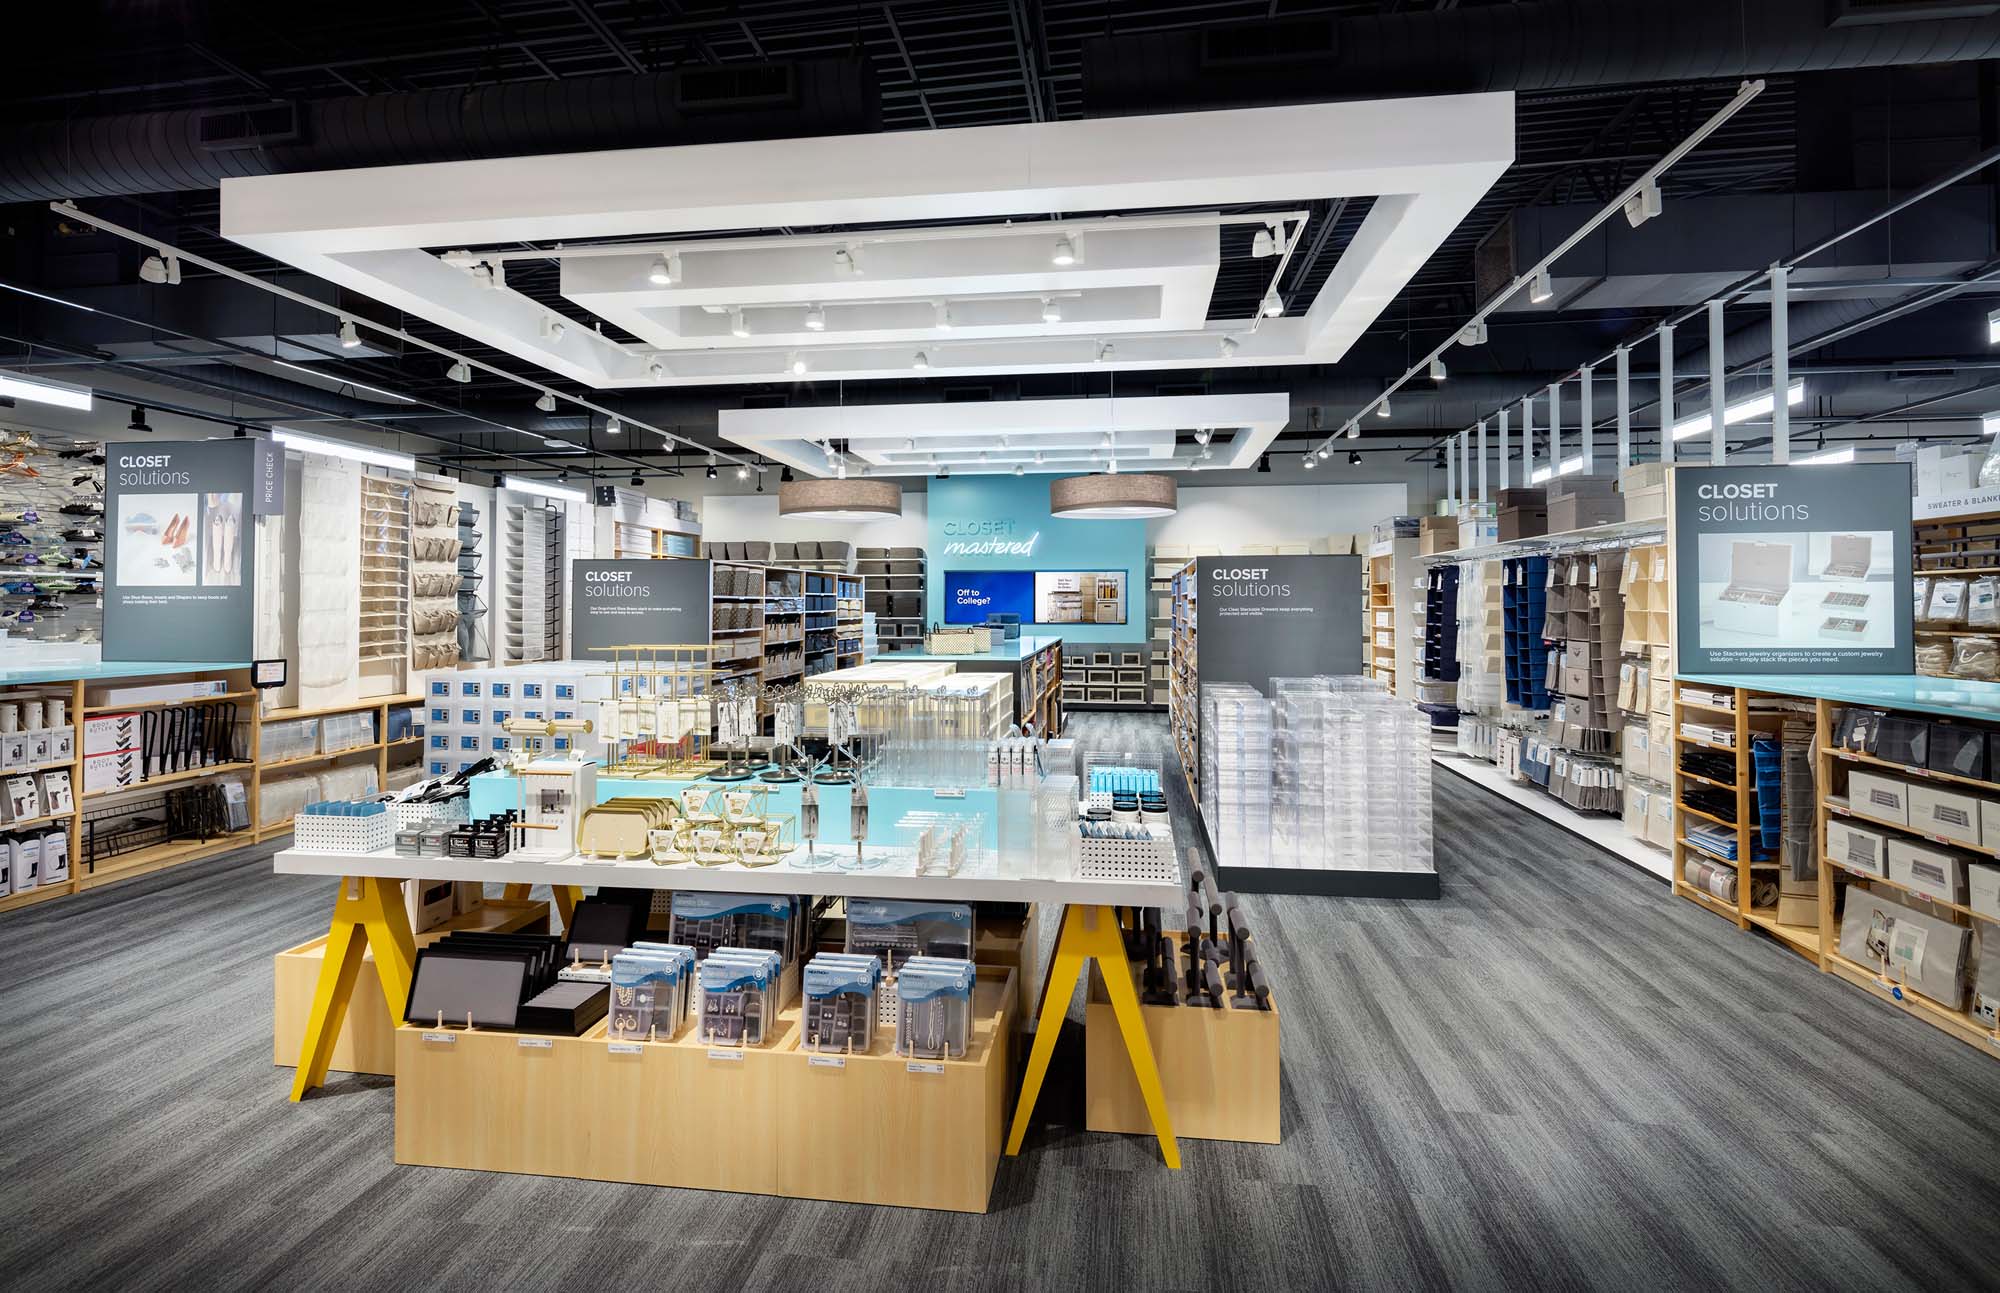 The Container Store - NELSON Worldwide